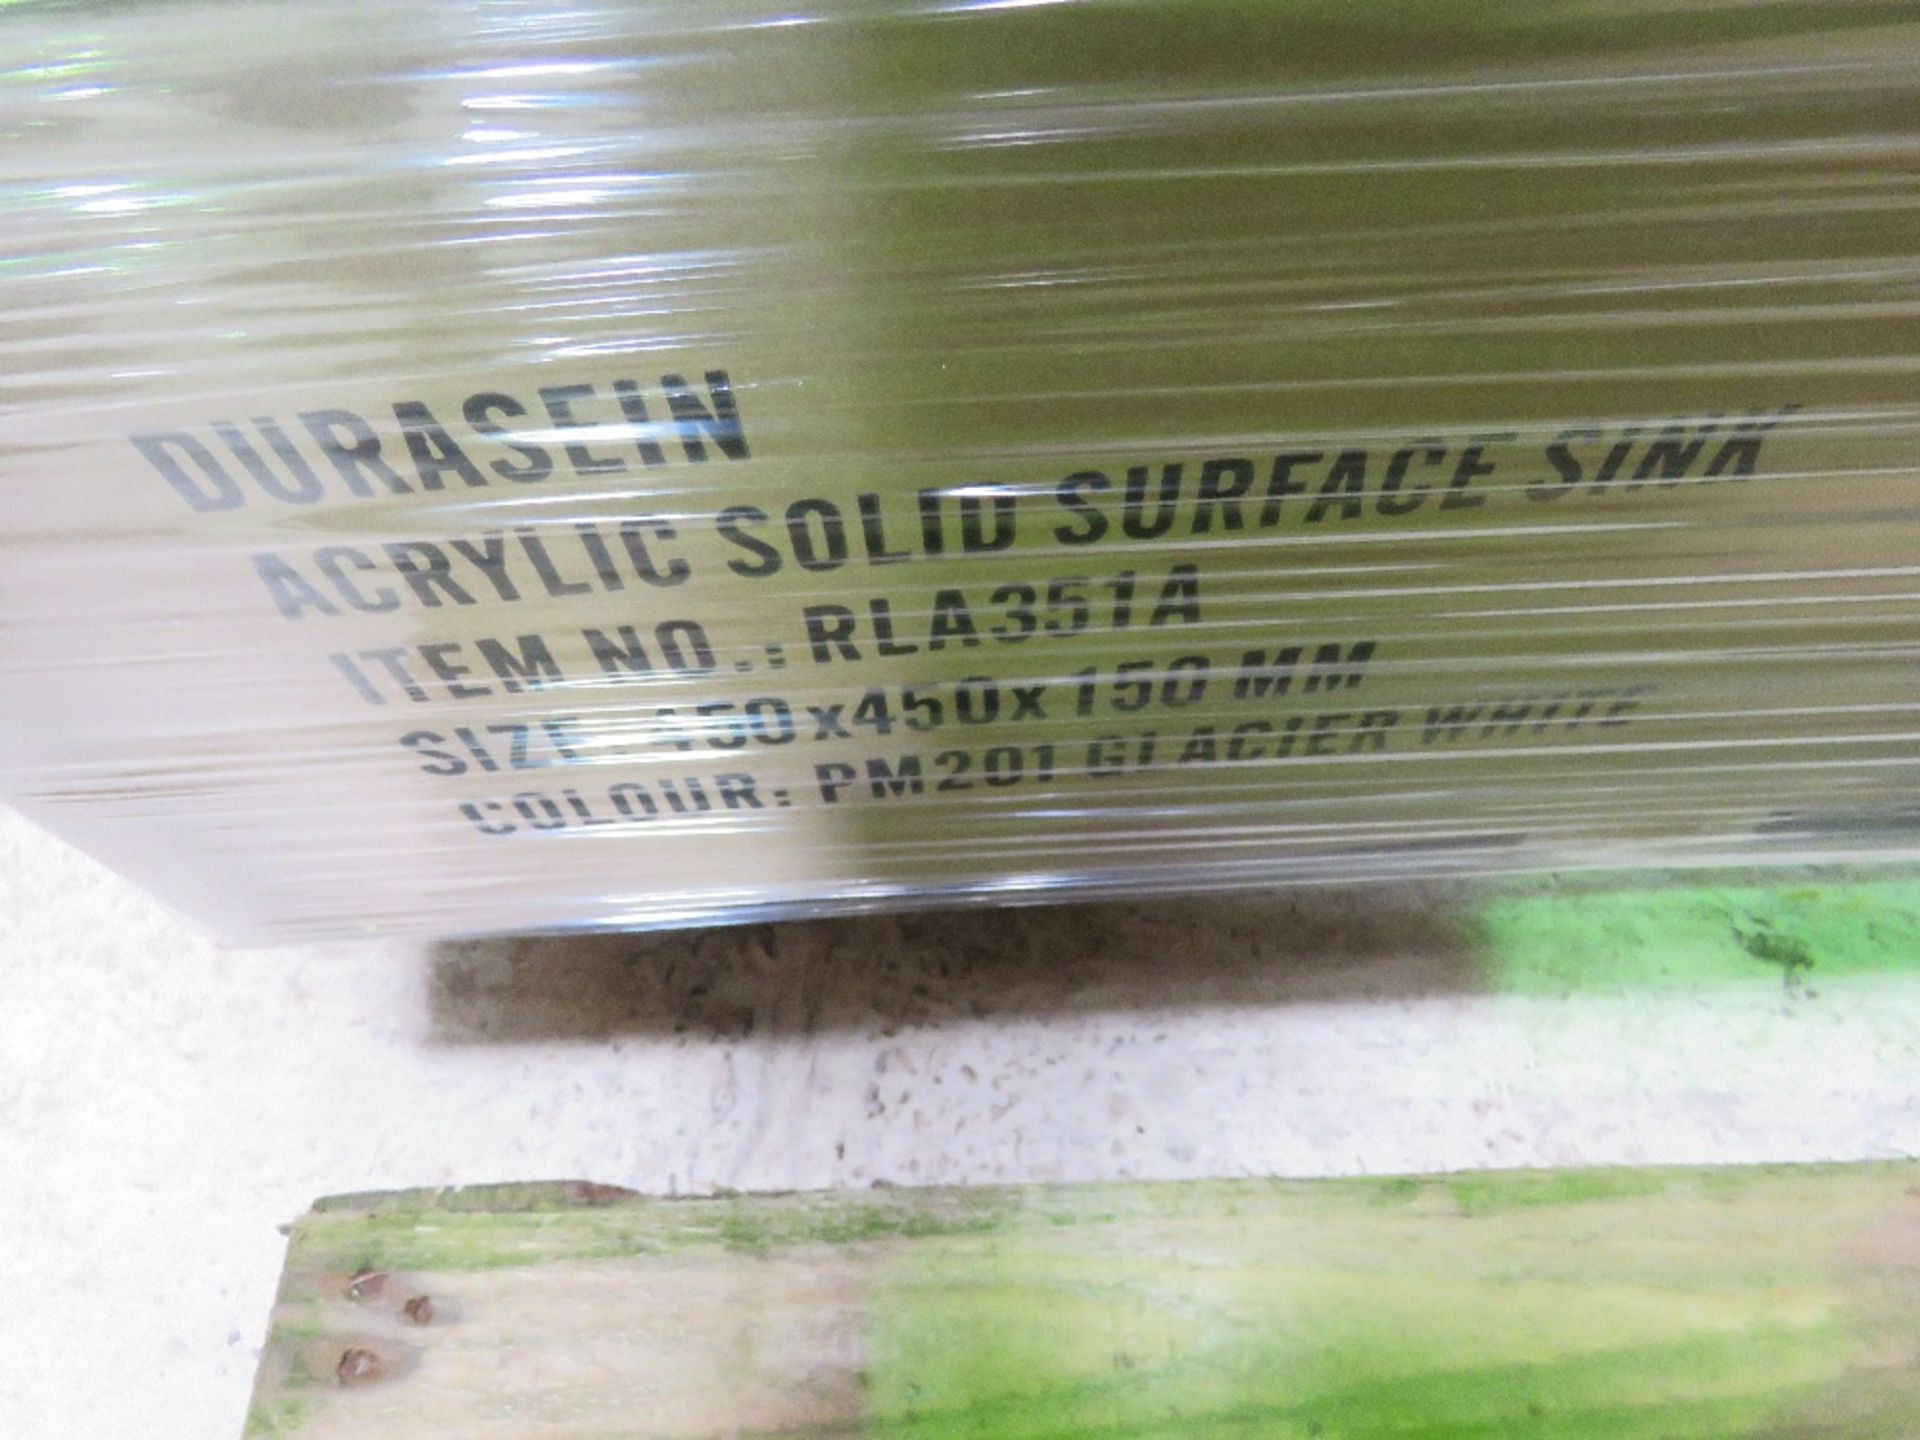 8NO DURASEIN 450X450X150 SOLID SURFACE ACRYLIC SINK, UNUSED, SURPLUS STOCK. - Image 2 of 3